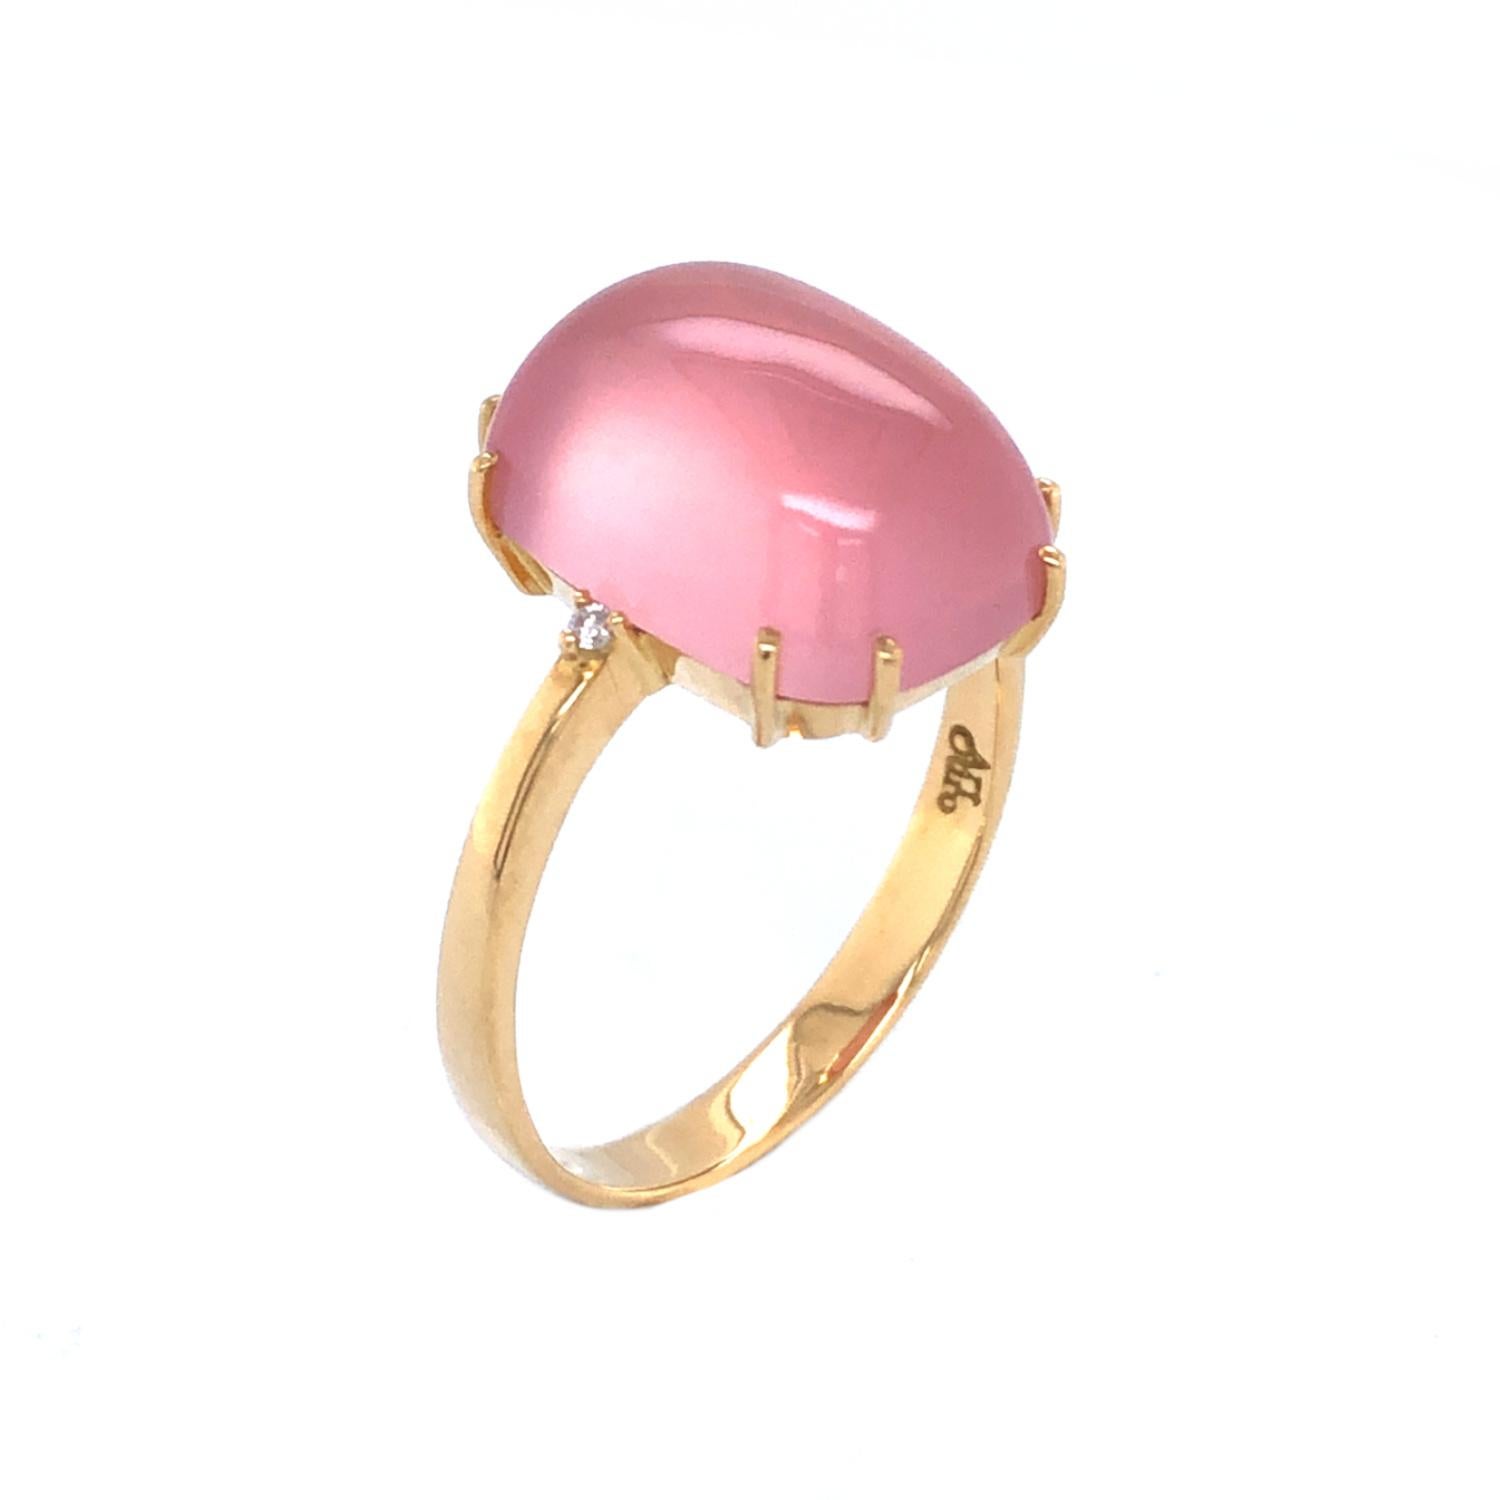 Simple yet elegant cabochon ring made with rose quartz and diamonds.

Materials:

- 18k solid gold ring

-A pair of 1.5mm G color, VS-2 clarity diamonds  

- 1 natural Brazilian rose quartz rectangle shape, cabochon style semi-precious